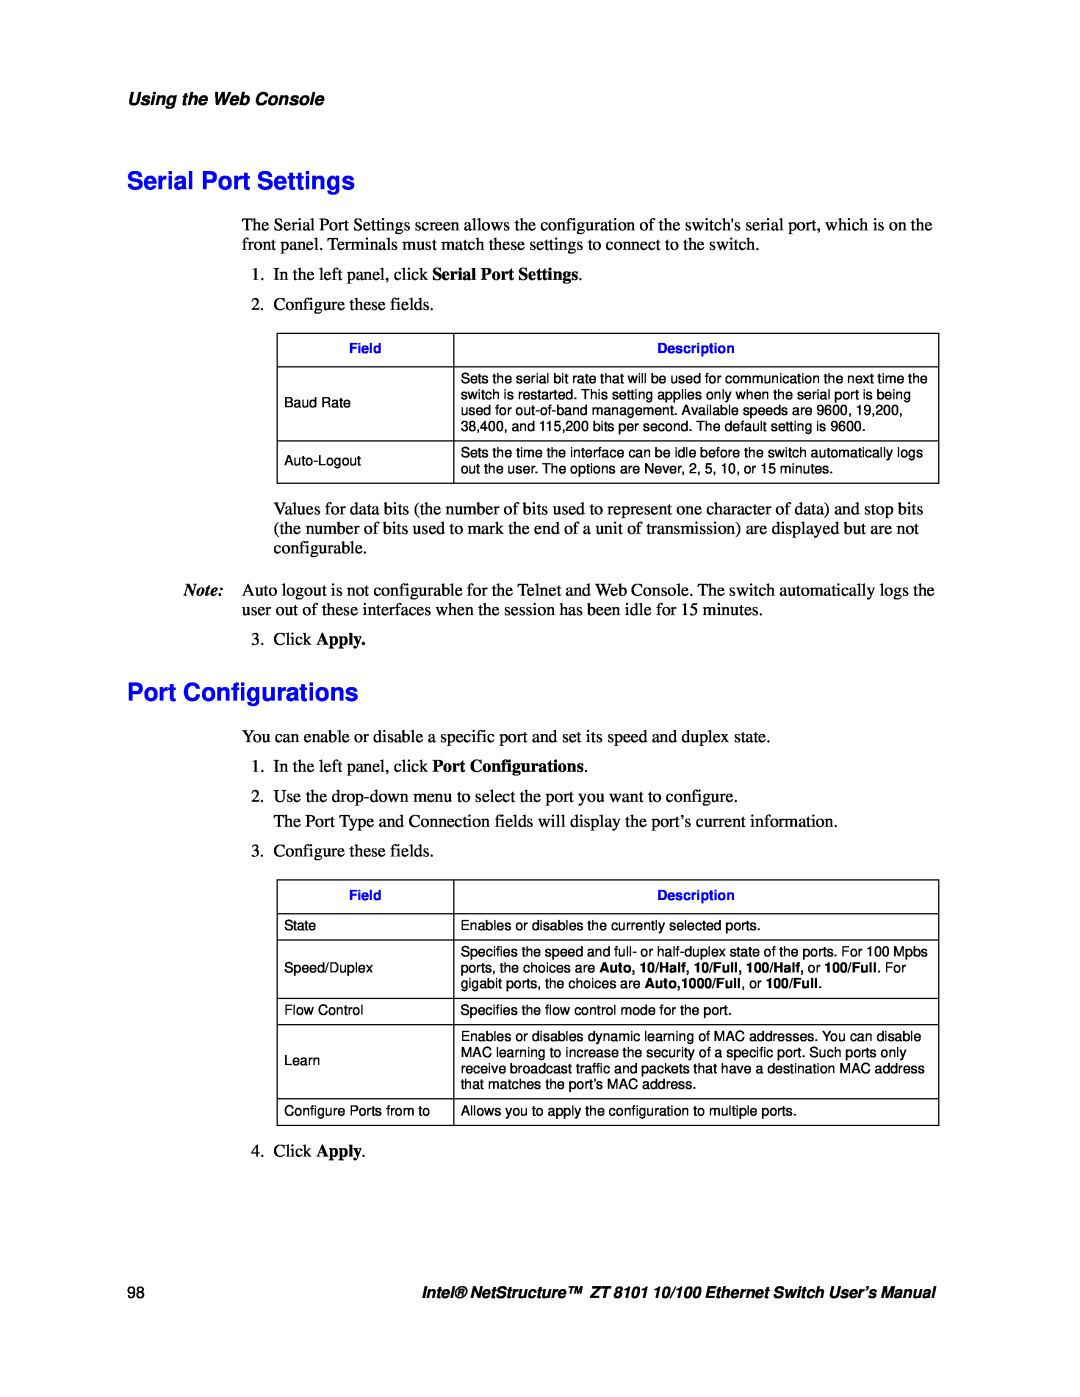 Intel ZT 8101 10/100 user manual Serial Port Settings, Port Configurations, Using the Web Console 